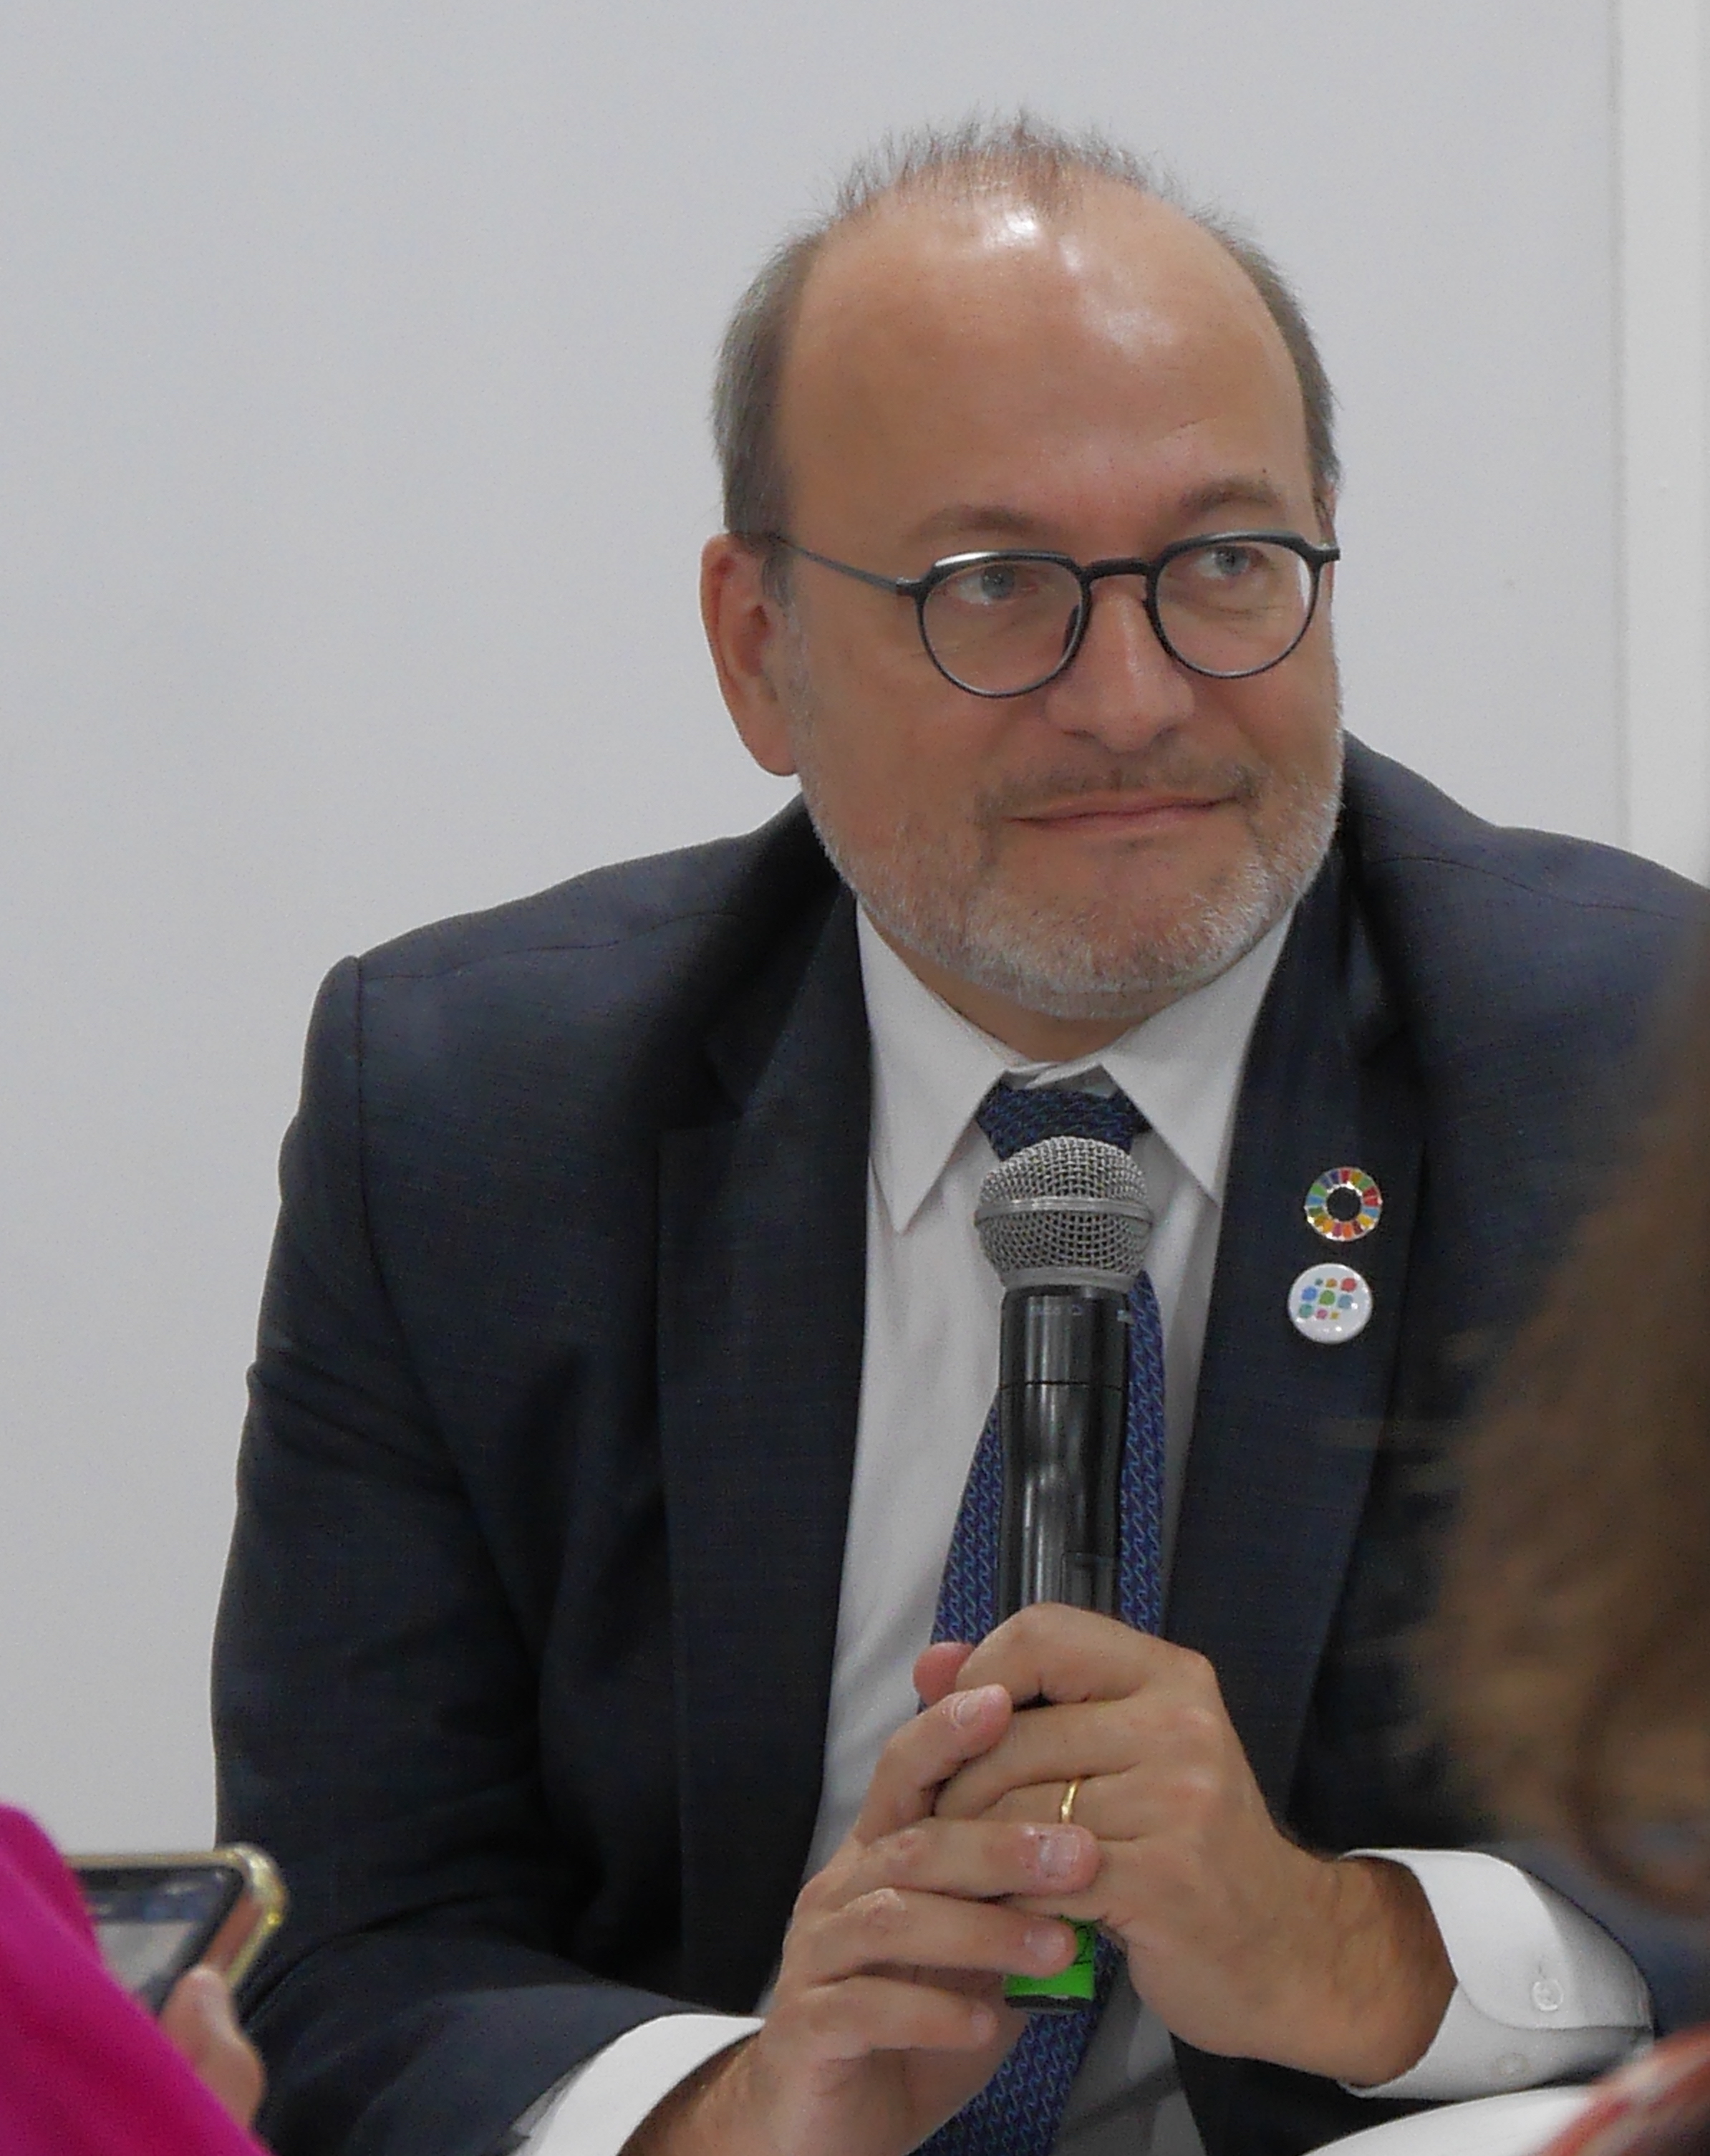 Rémy Rioux, AFD Director General, speaks at COP27